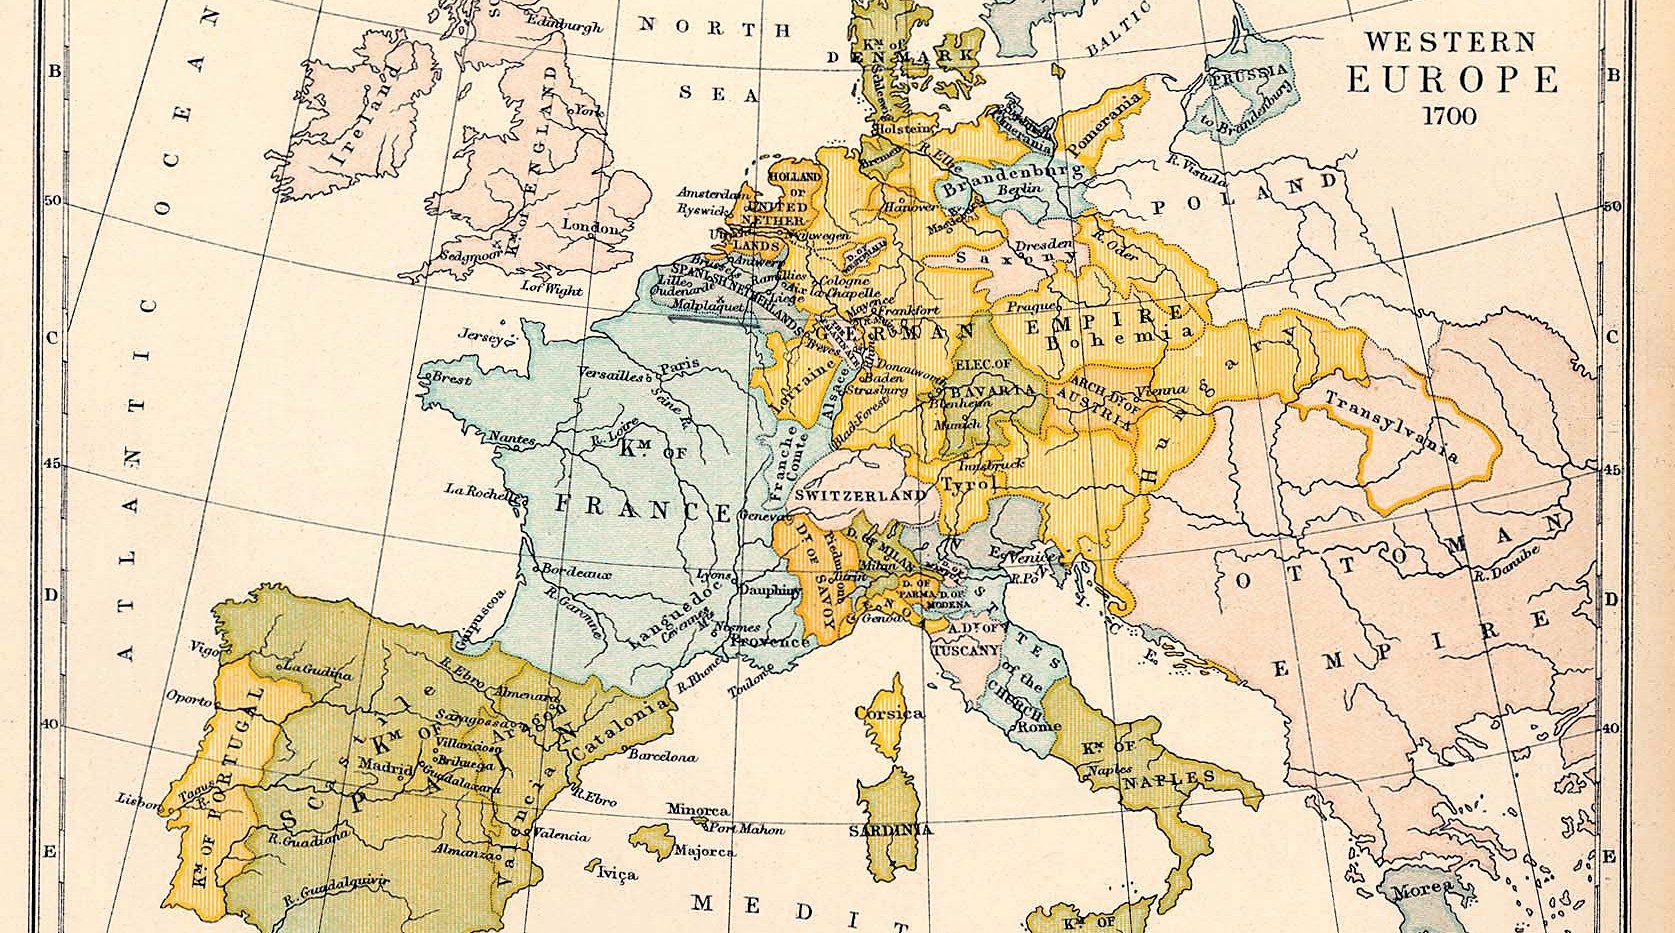 Map of Western Europe in 1700. Source: University of Texas at Austin, Wikimedia Commons, Public domain.